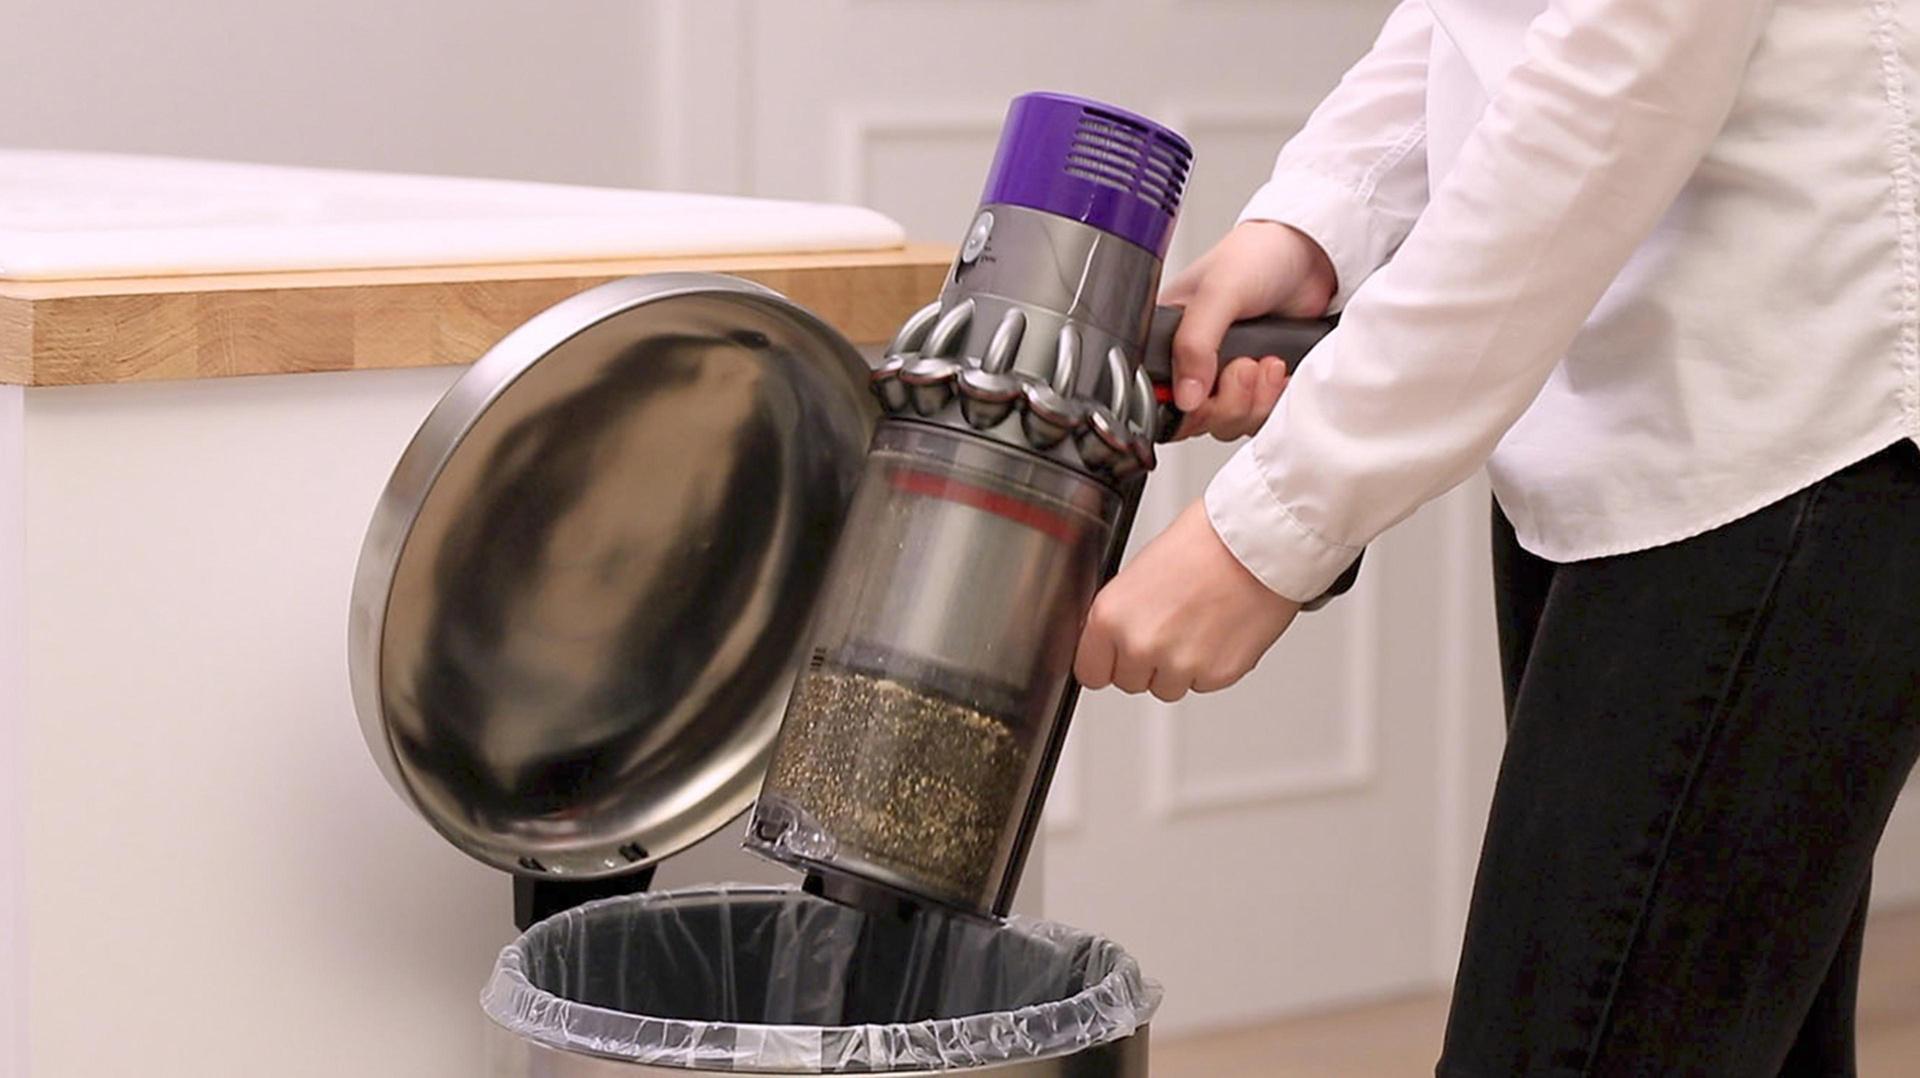 How To Empty A Vacuum Cleaner